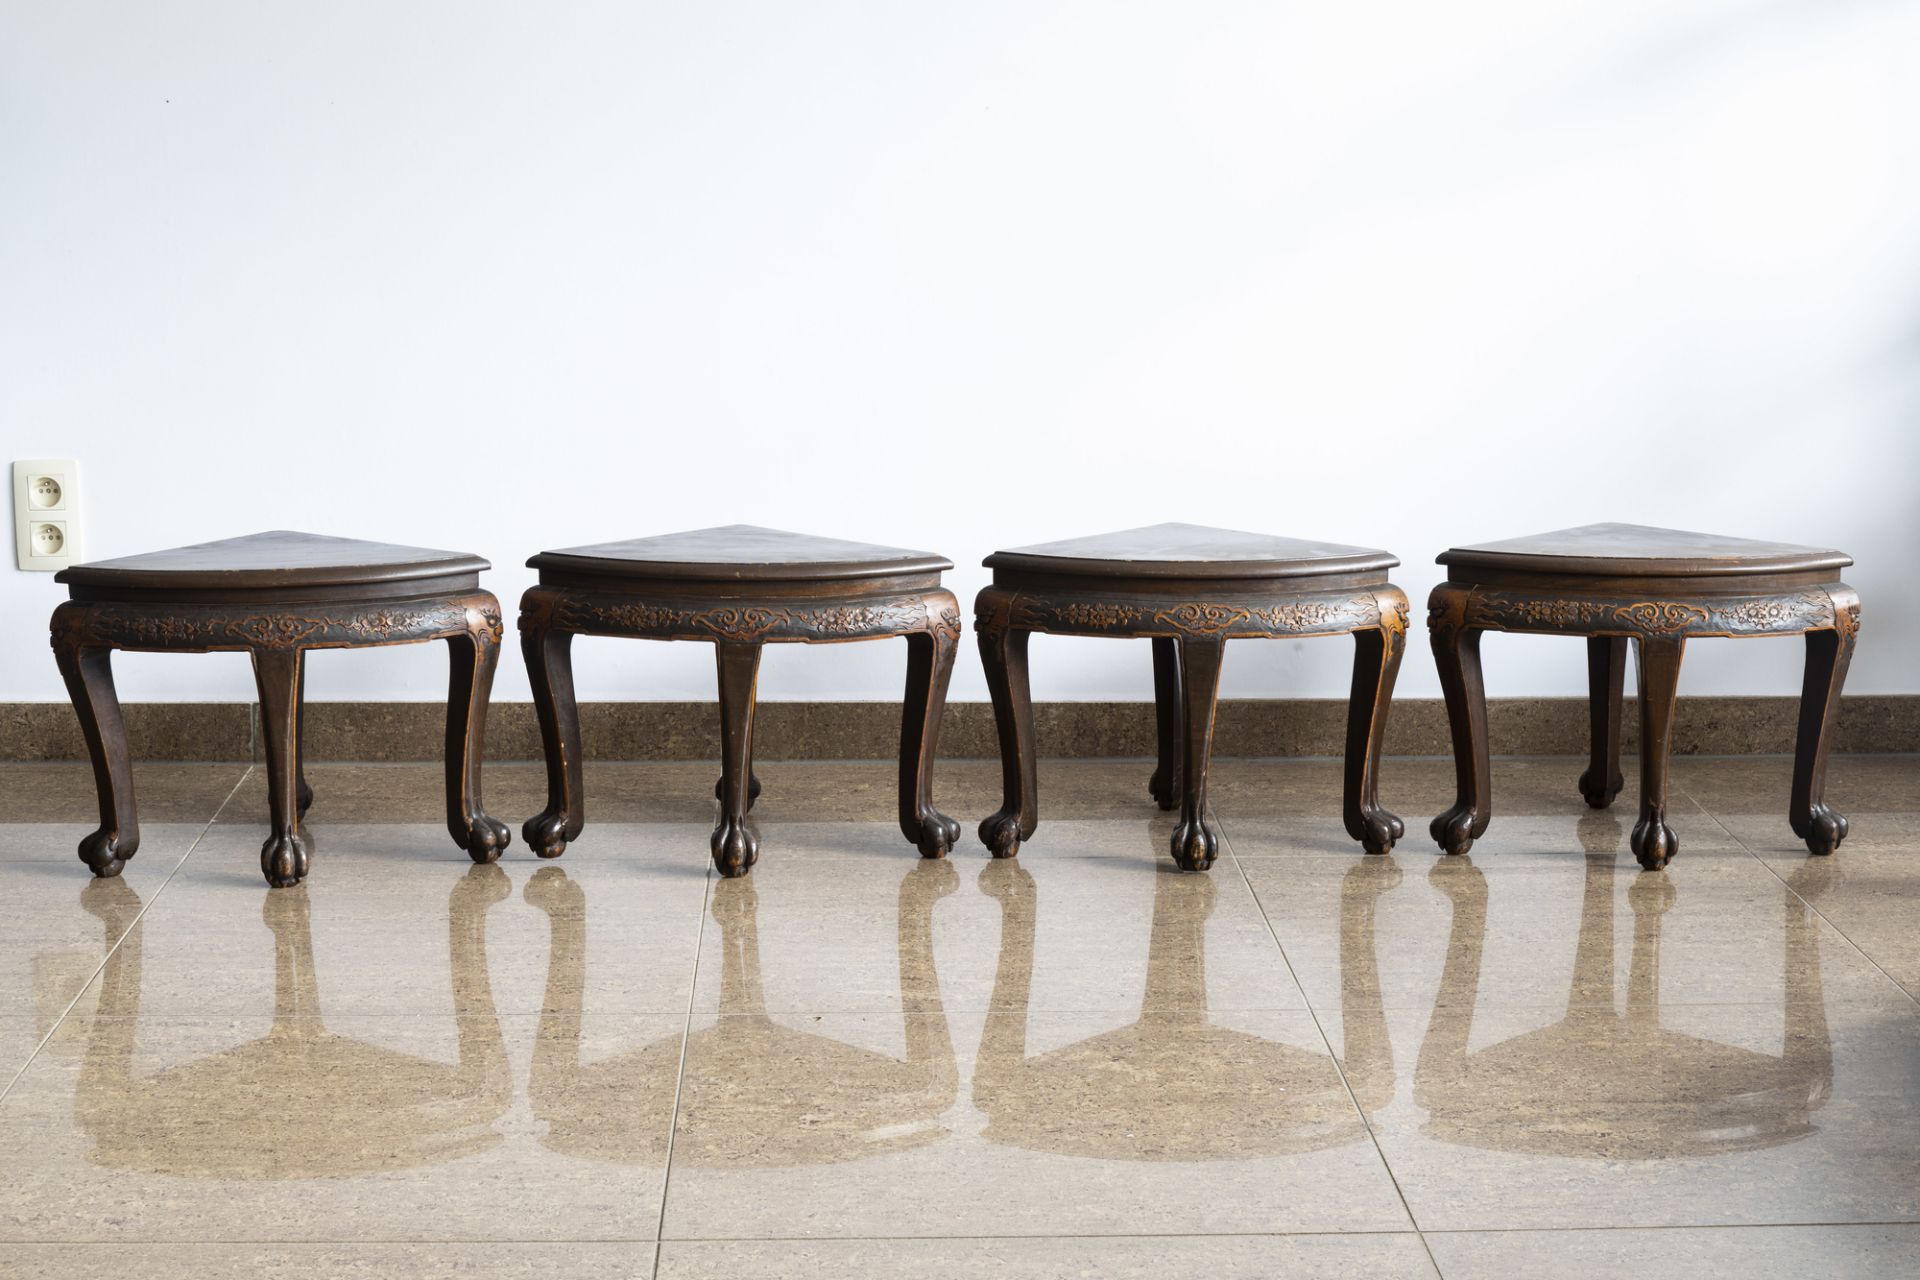 A Chinese wooden coffee table and four stools with relief design, 20th C. - Image 8 of 13